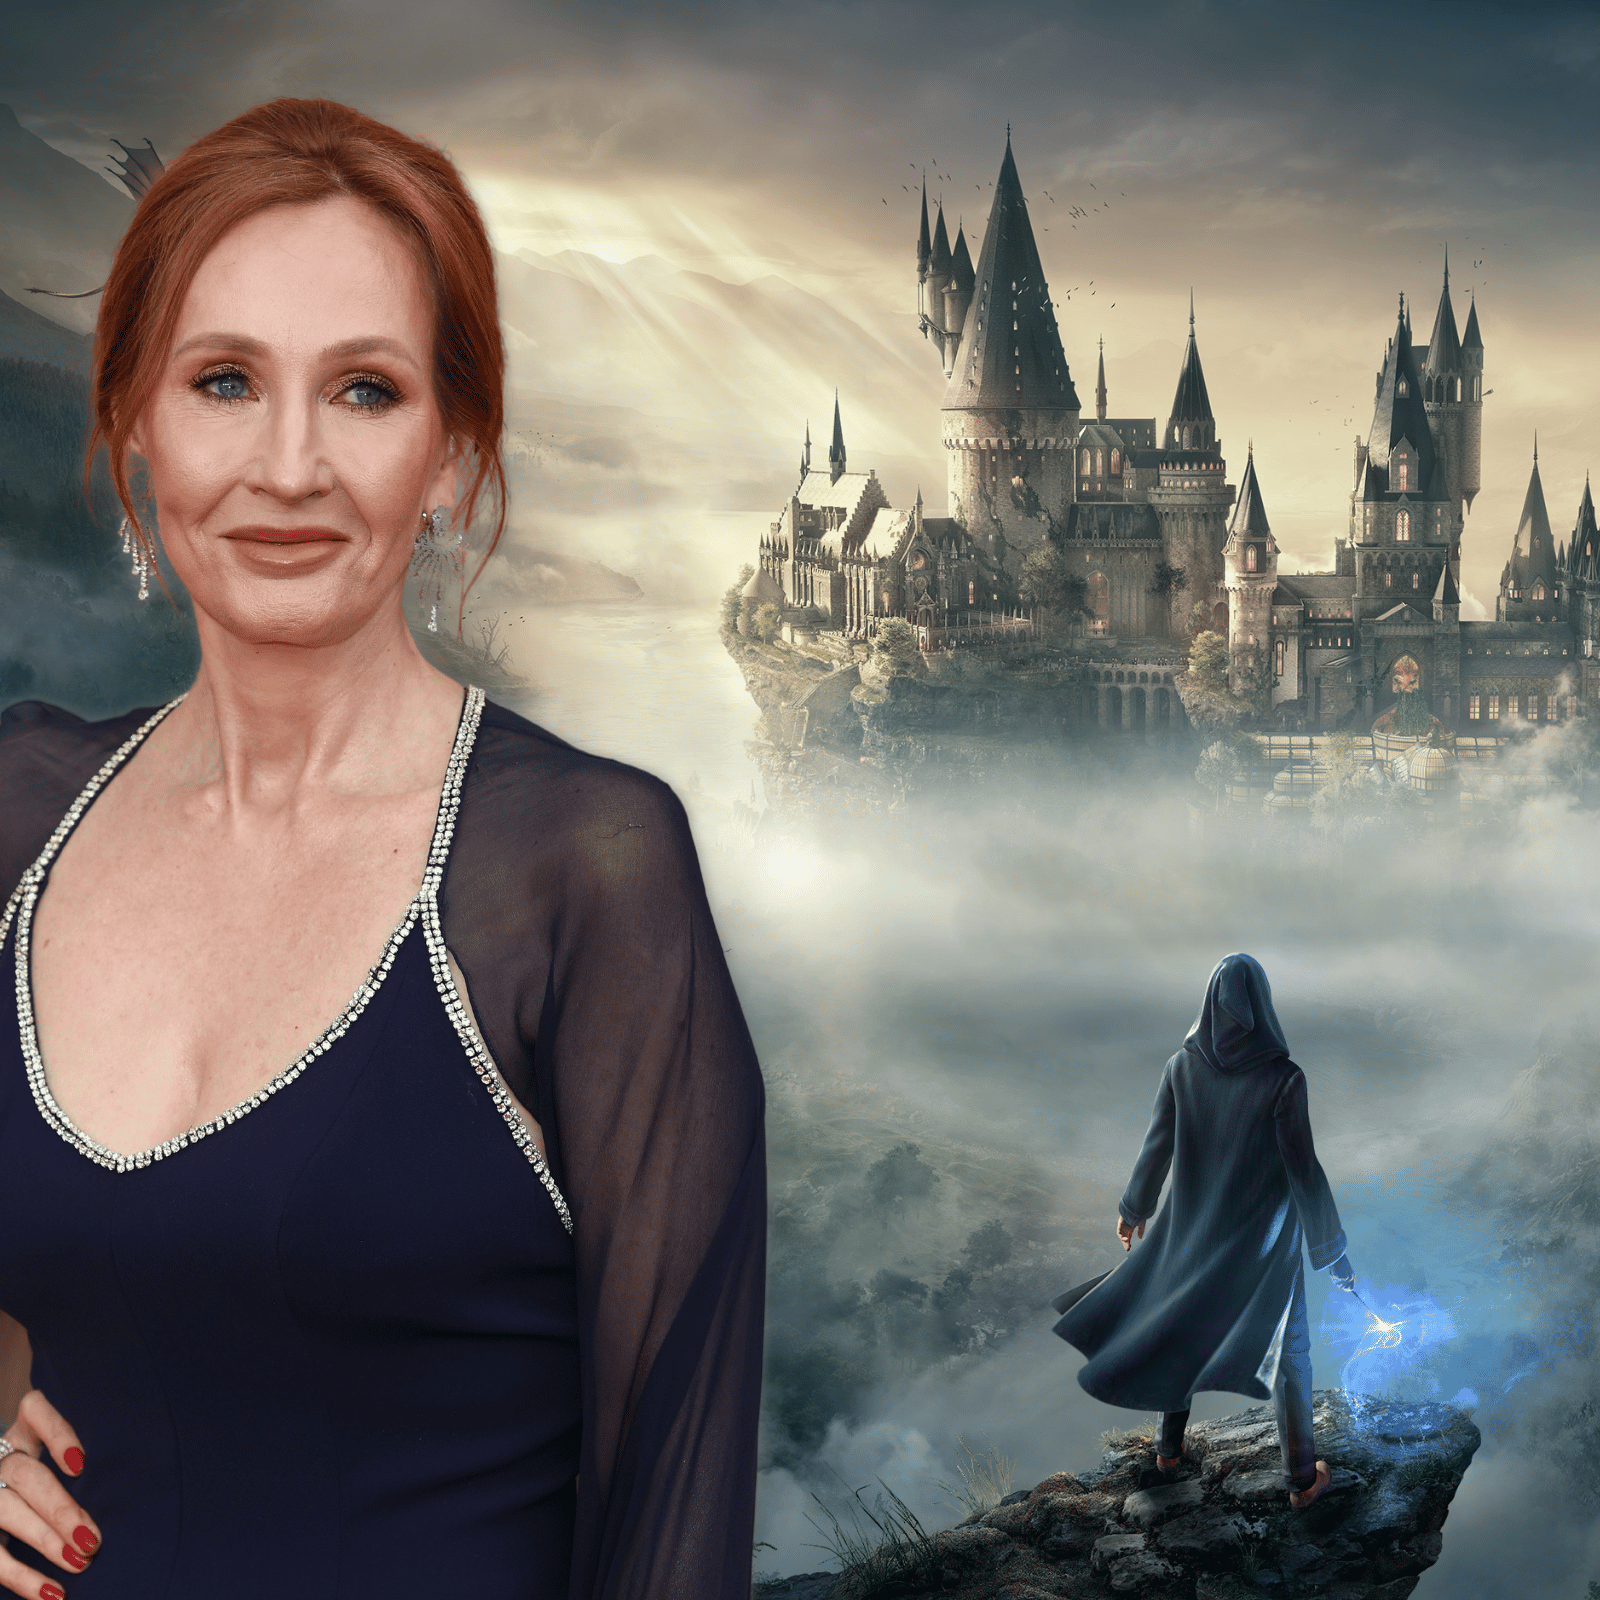 Harry Potter Hogwarts Legacy game will allow for trans characters, report  says - CNET